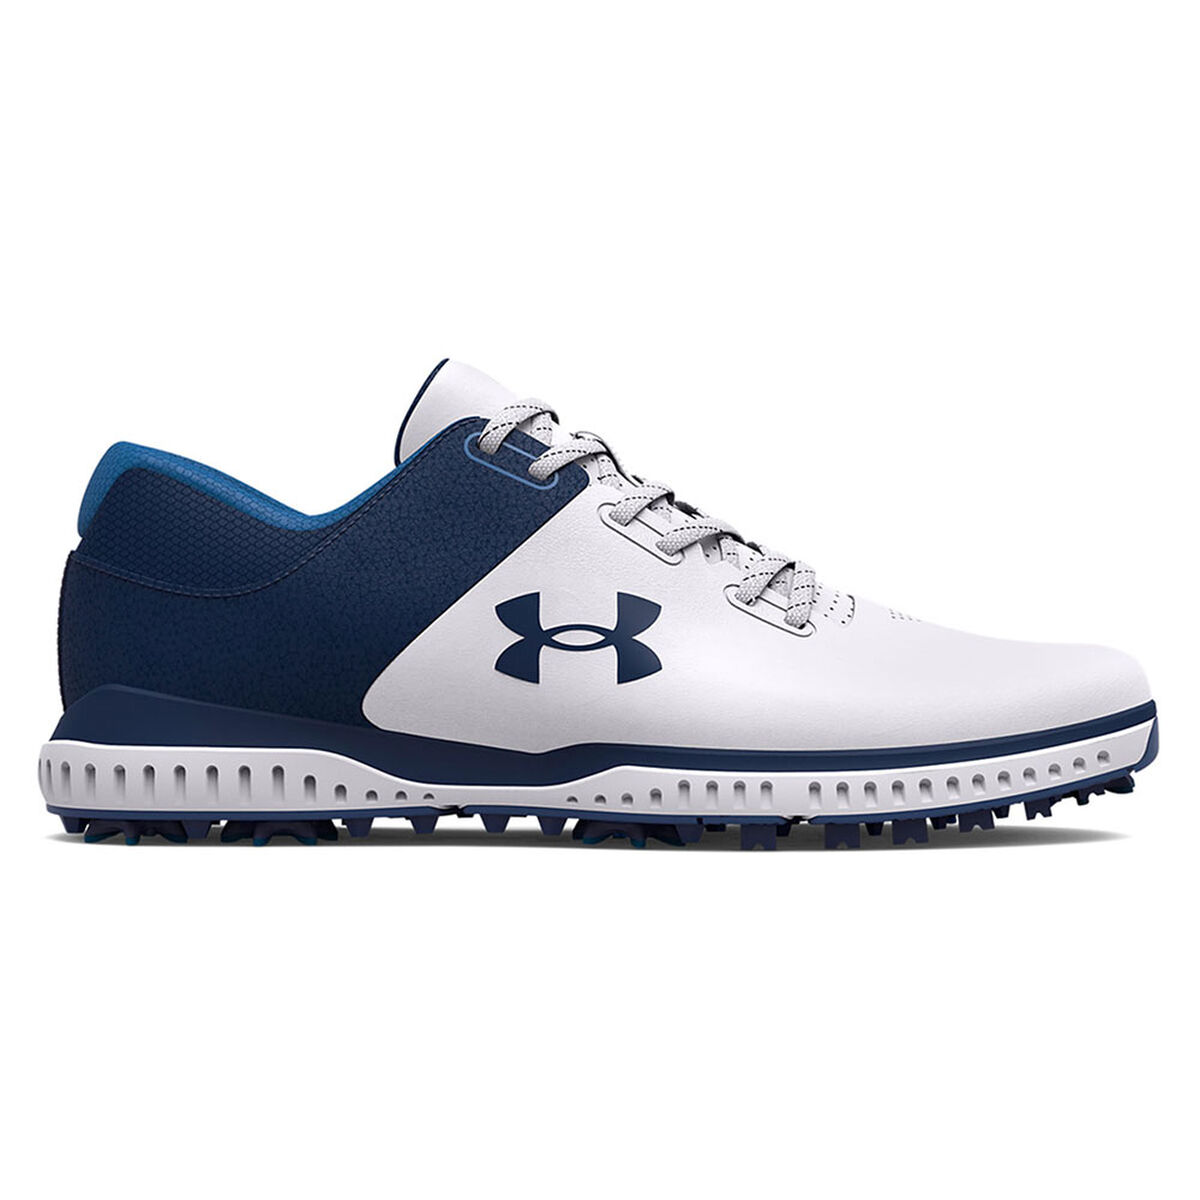 Under Armour Men’s Medal RST Waterproof Spiked Golf Shoes, Mens, White/academy/academy, 8.5 | American Golf